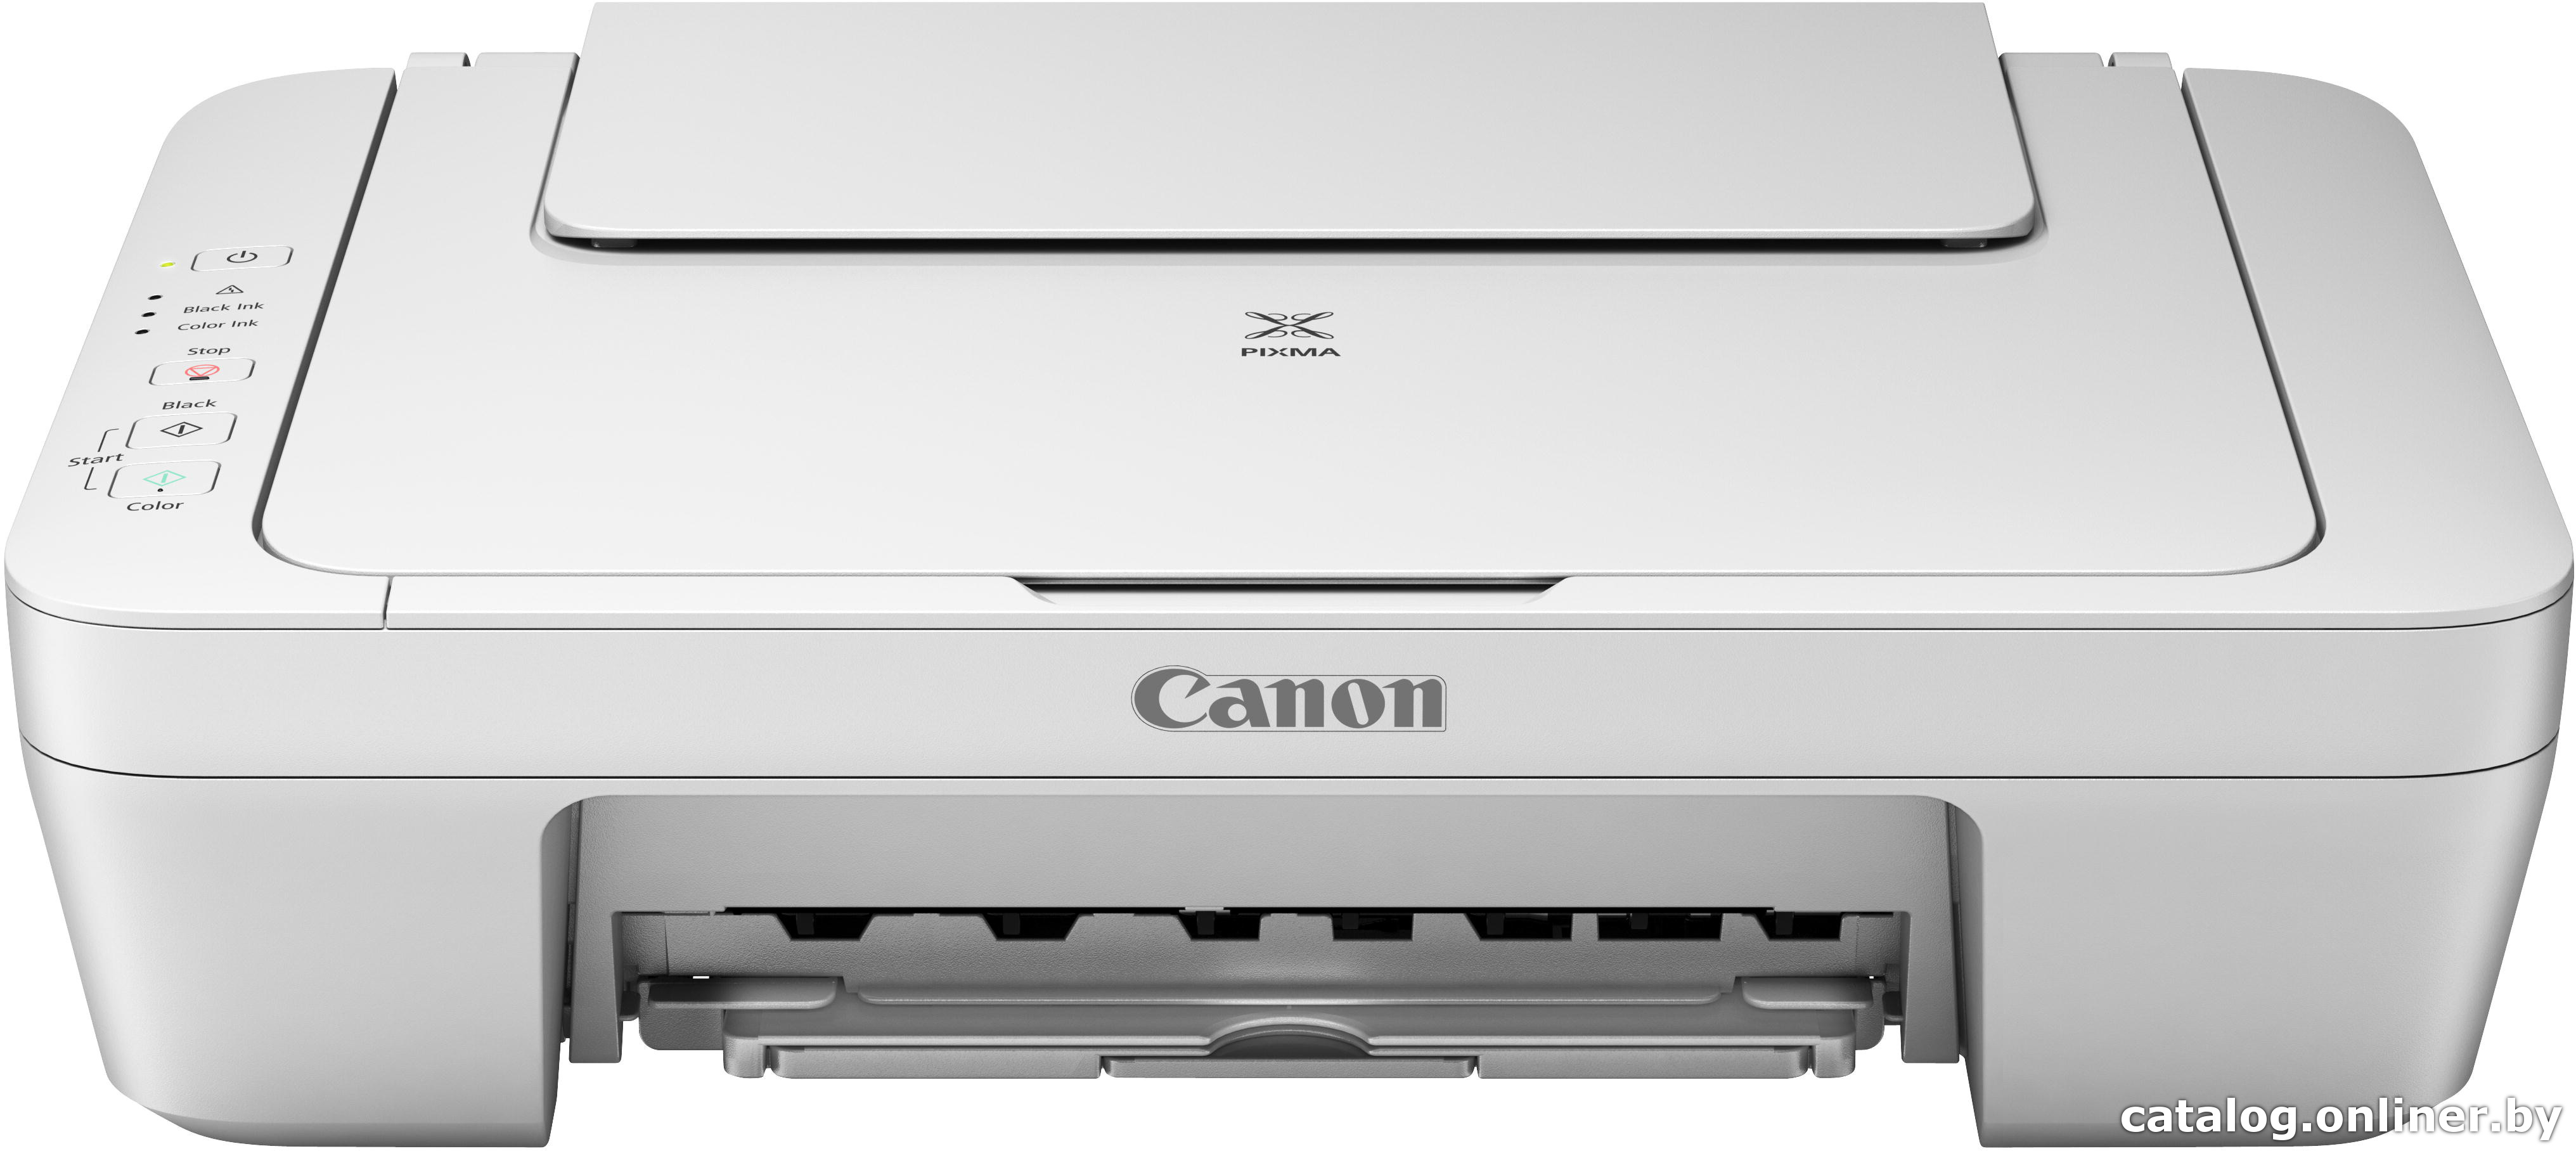 Canon MG2555S Driver Mac High Sierra How-to Download and Install - Featured